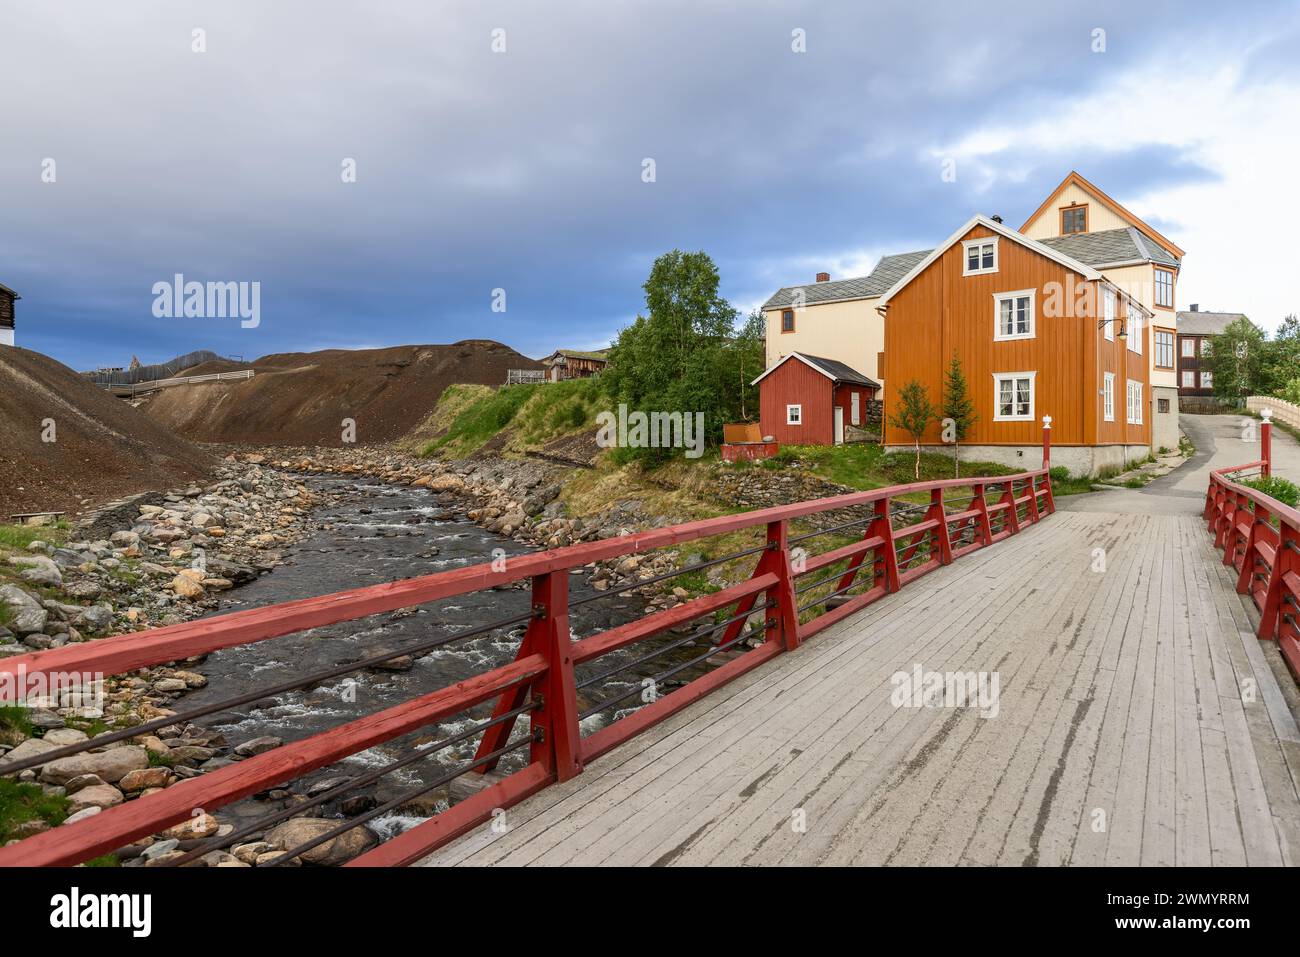 In Roros, a red bridge over the Glomma River provides a picturesque entrance to a street lined with traditional Norwegian wooden homes Stock Photo